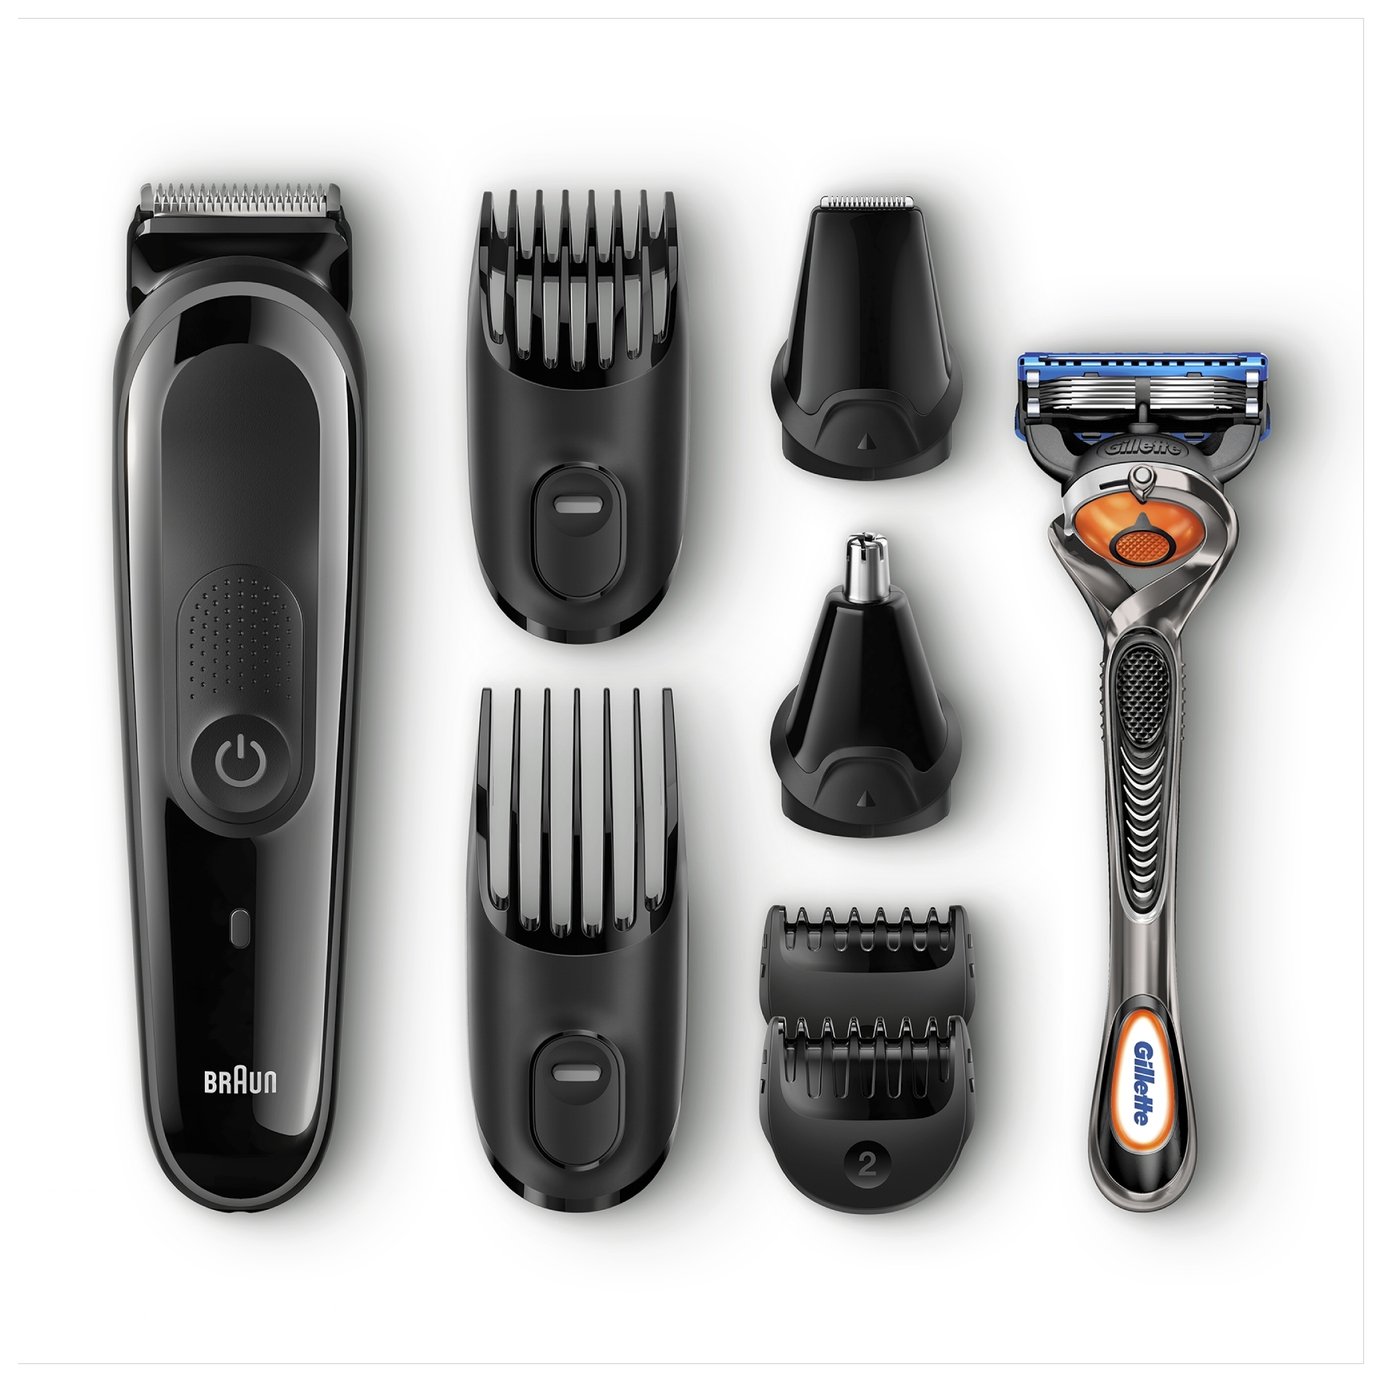 Braun 8in1 Beard & Hair Grooming Kit with Precision Trimmer